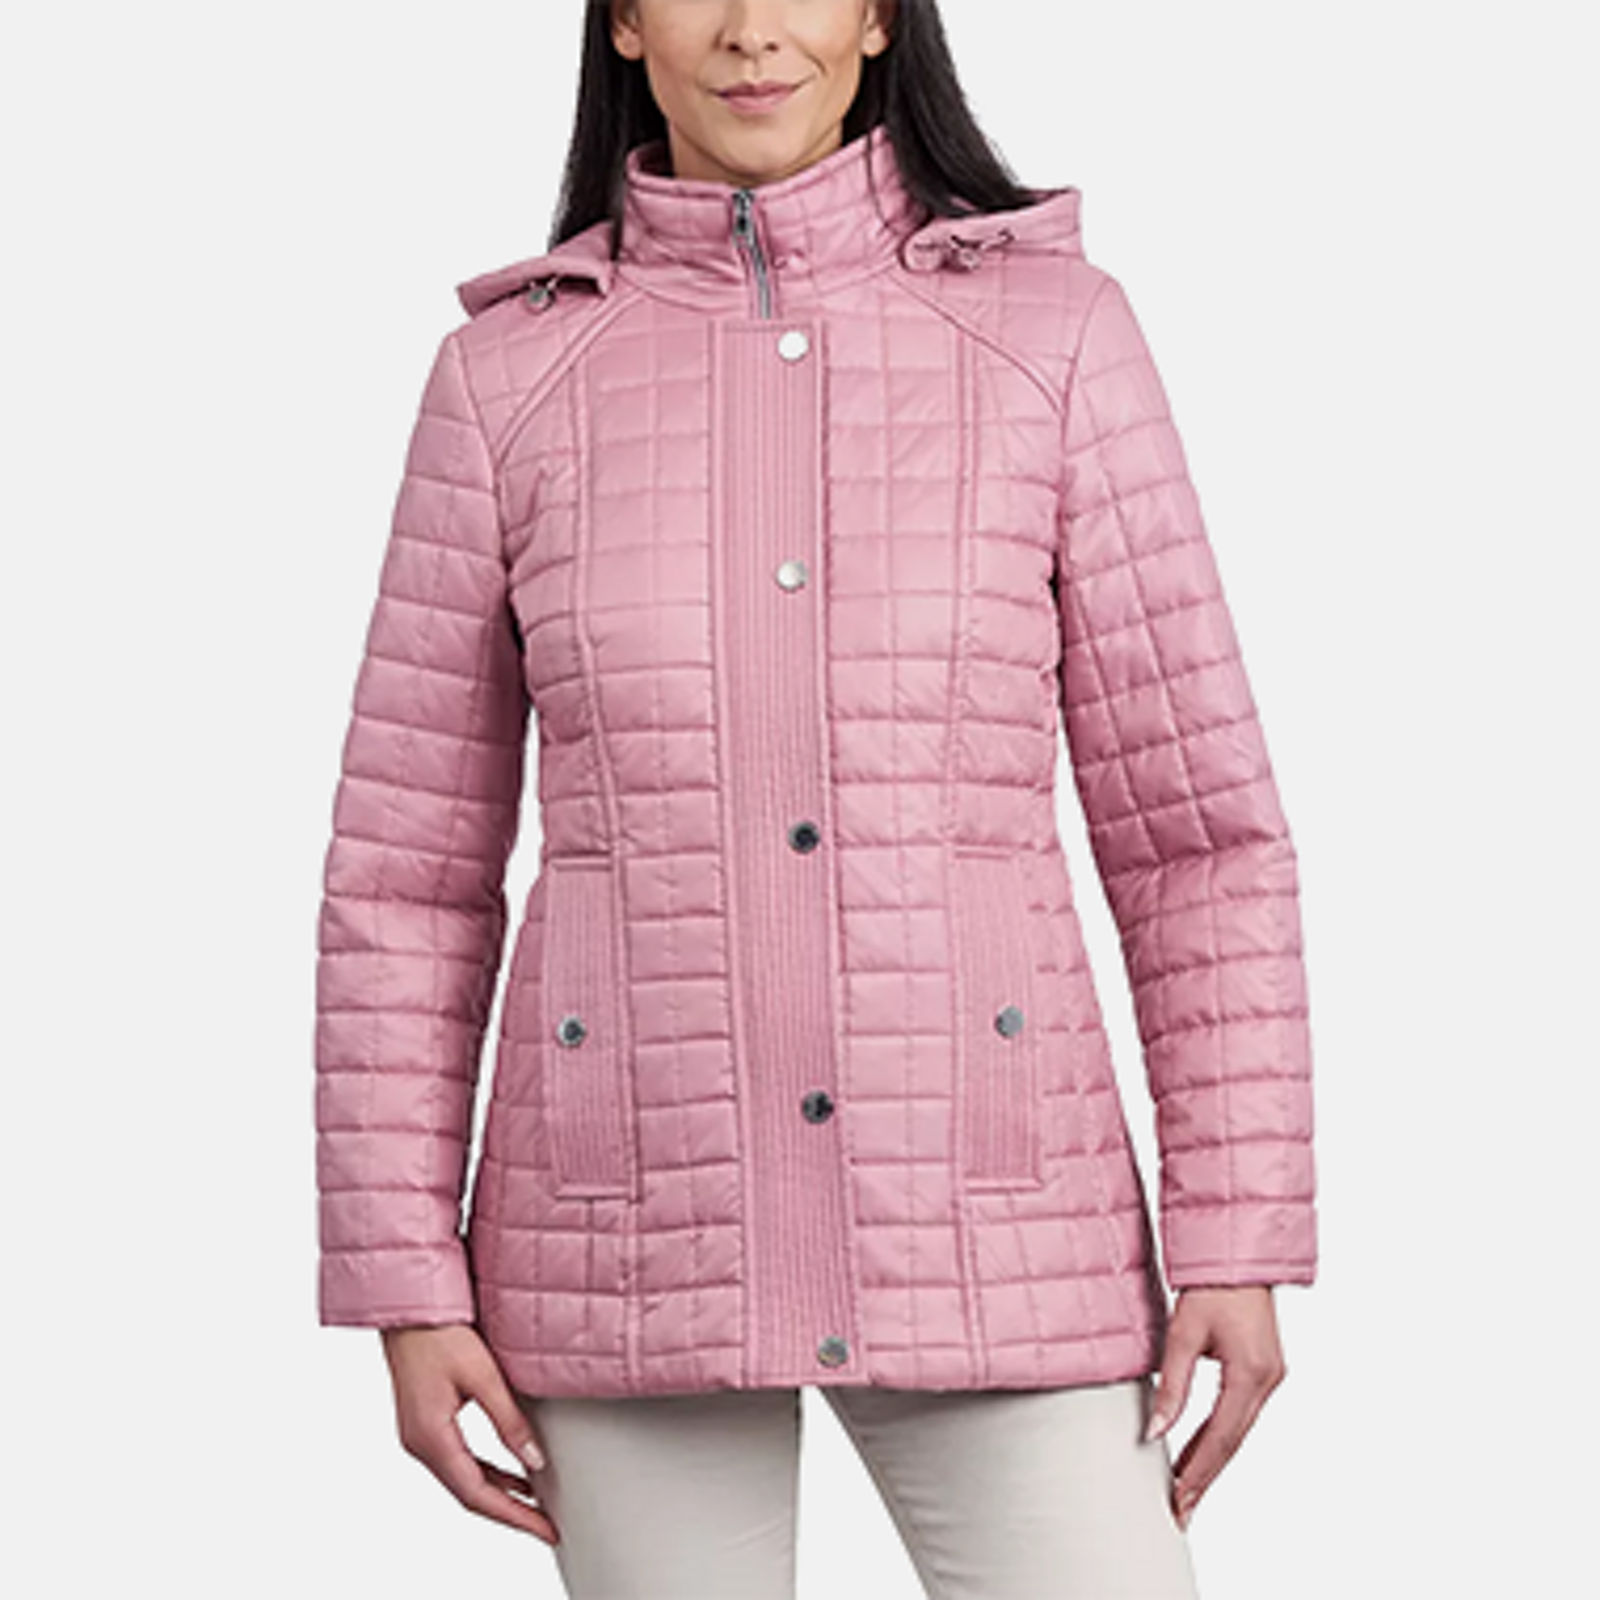 Costco Deals - 🙋‍♀️These @nautica ladies puffer #jackets